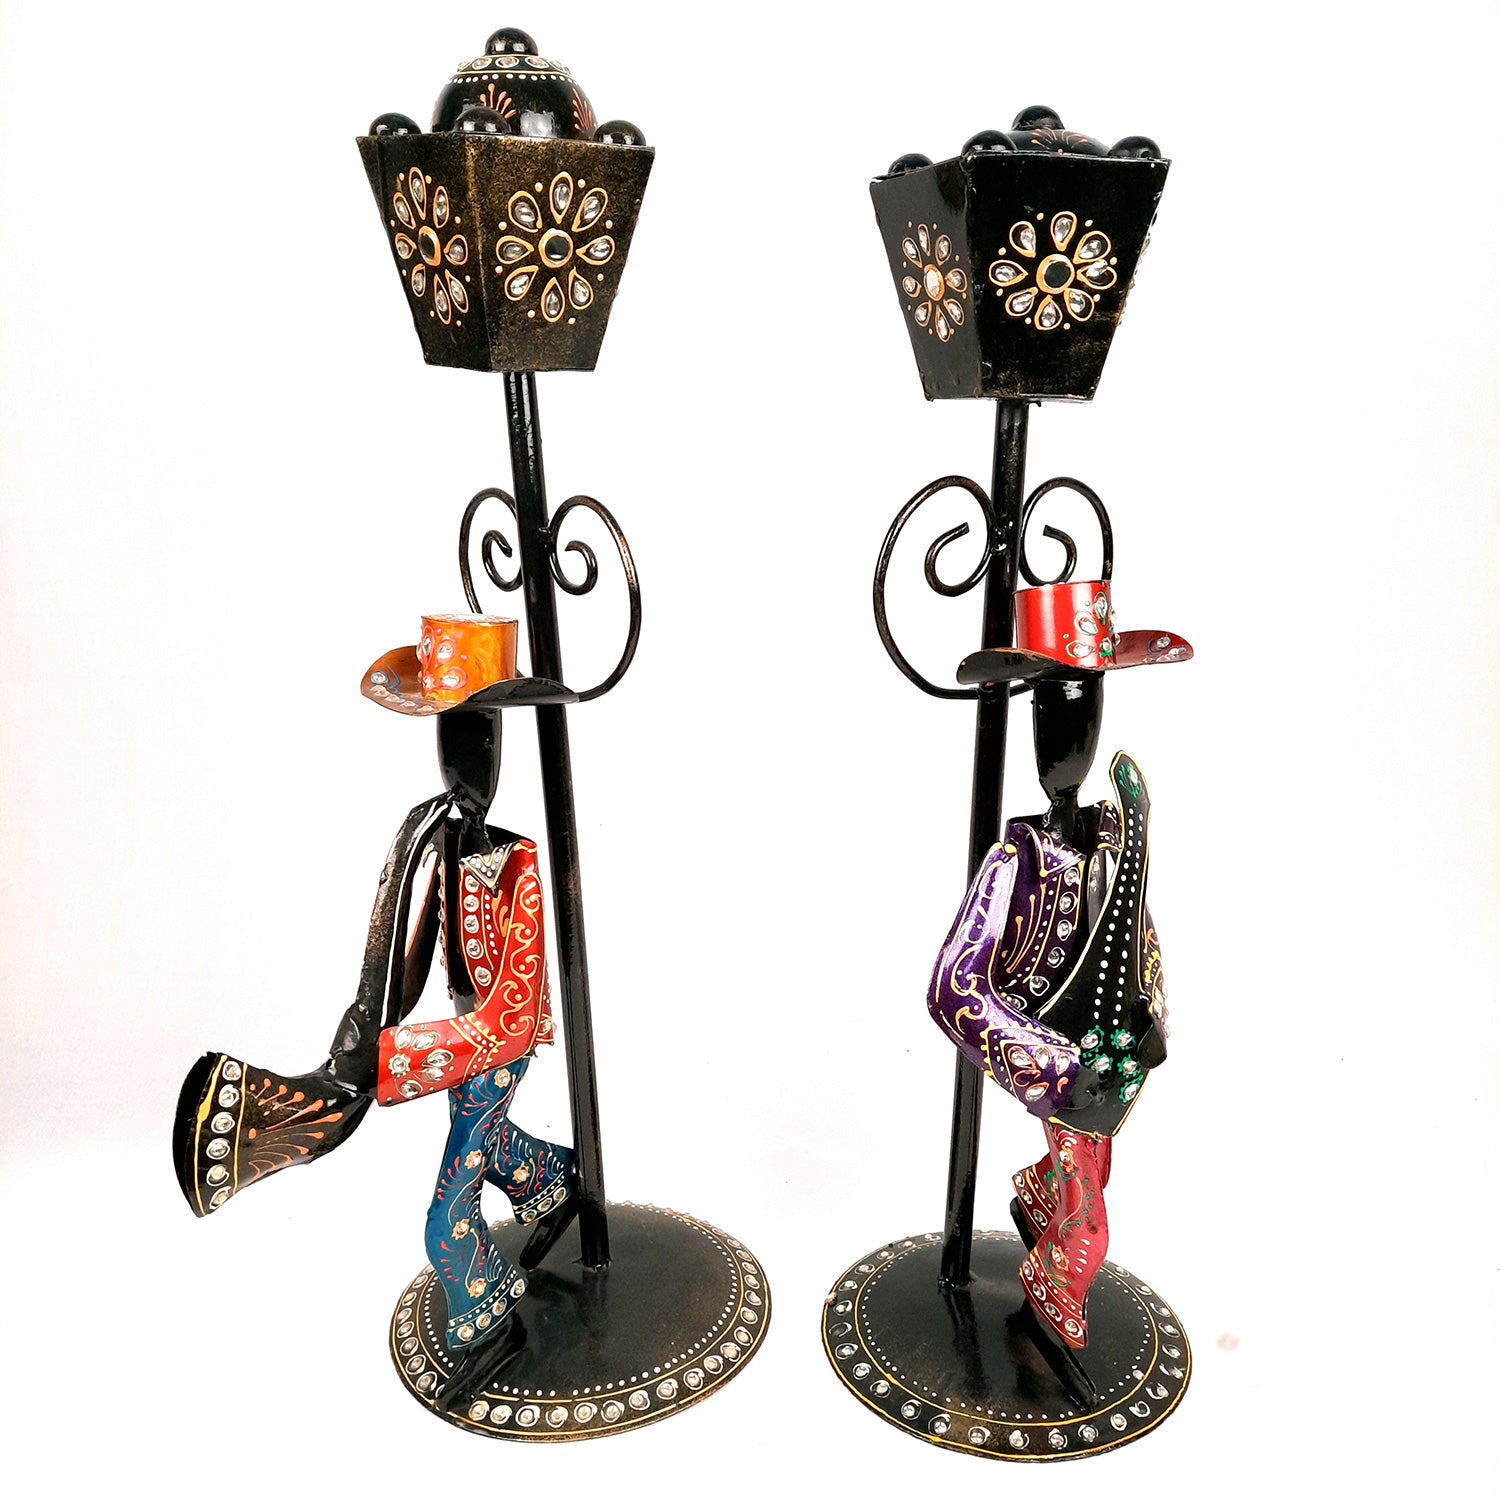 Showpiece Set - Musician Playing Musical Instrument Under Lamp Post | Handicraft Figurines With Kundan Work - For Table, Living Room, Bedroom & TV Unit | Big Show Piece For Office Desk & Gifts- 22 Inch (Set of 2) - apkamart